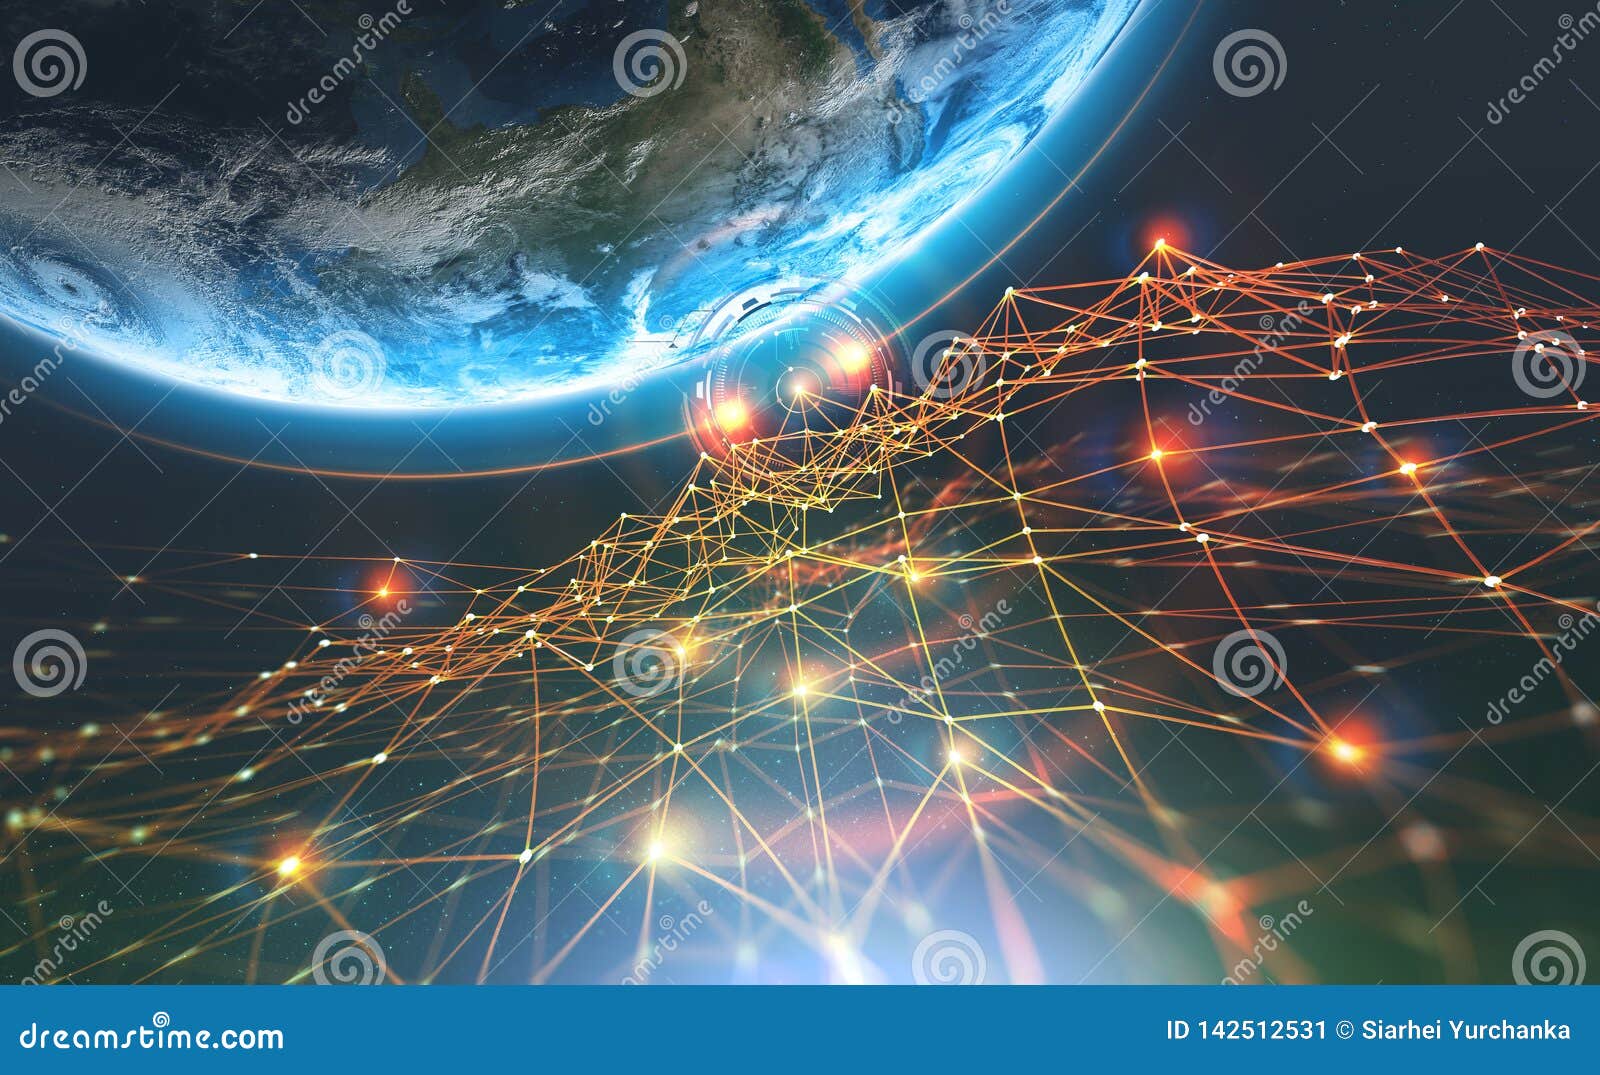 block chain network and planet earth. artificial intelligence. global decentralized database